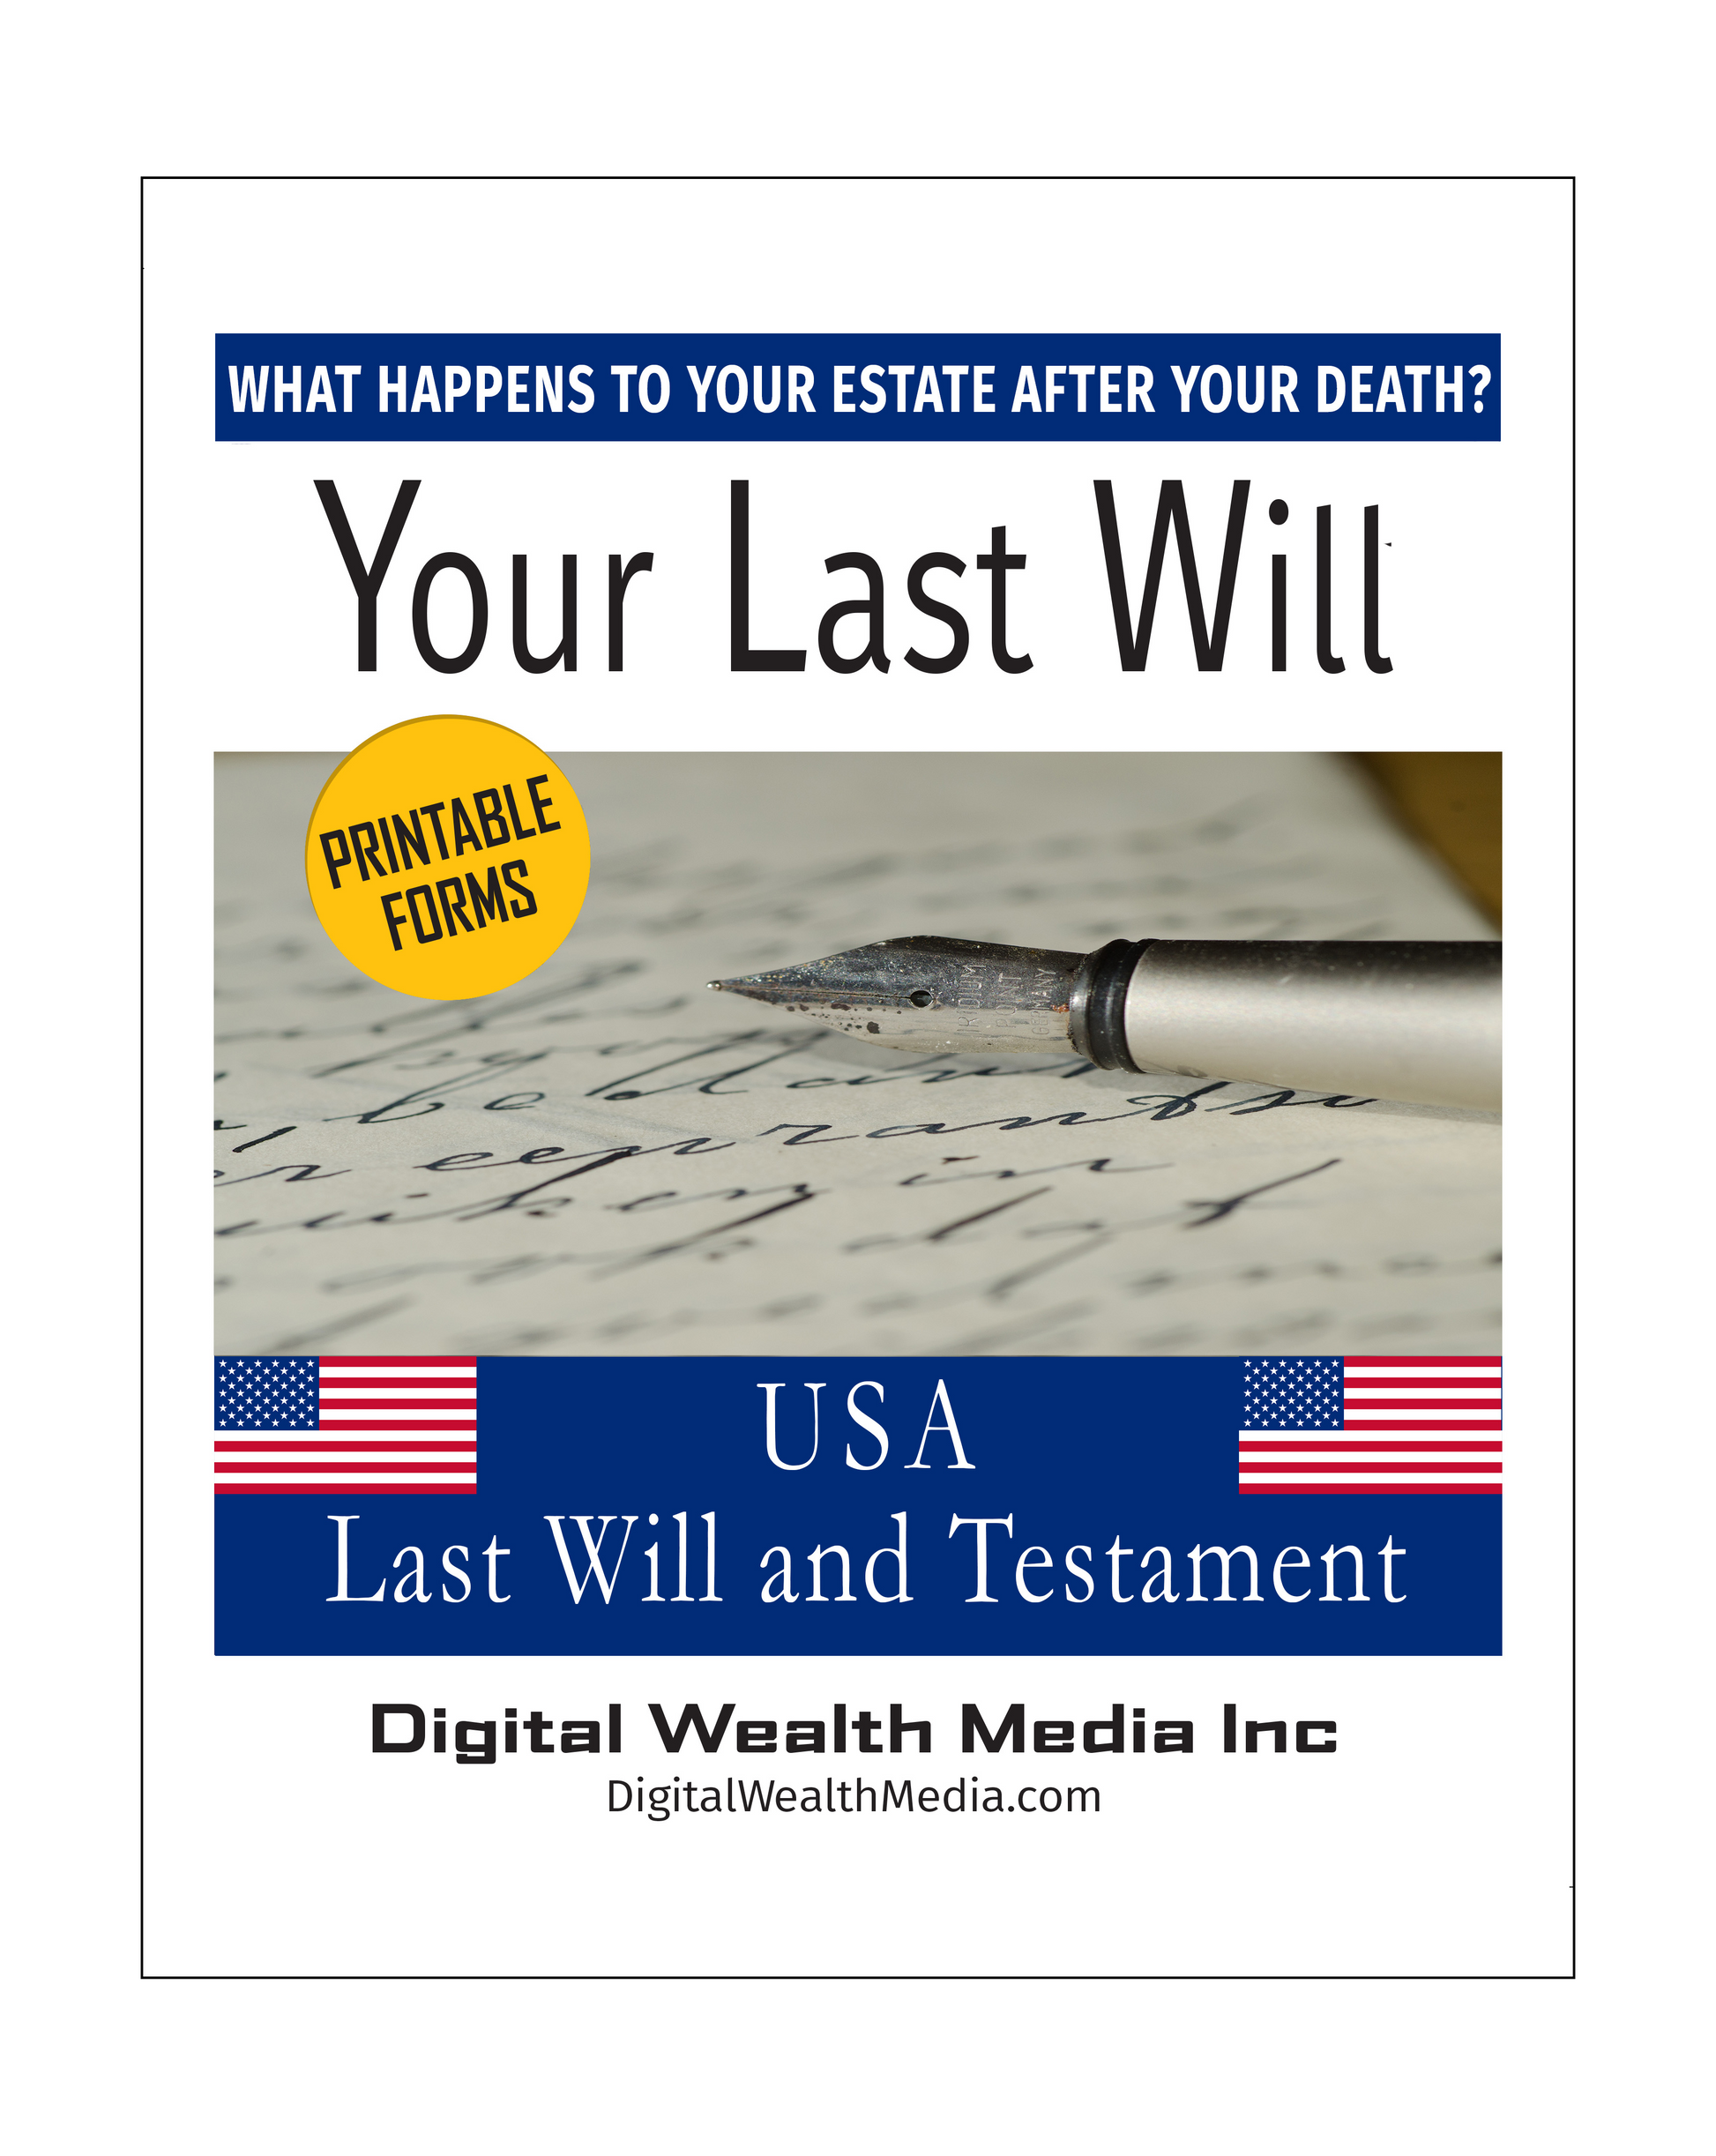 USA Last Will and Testament